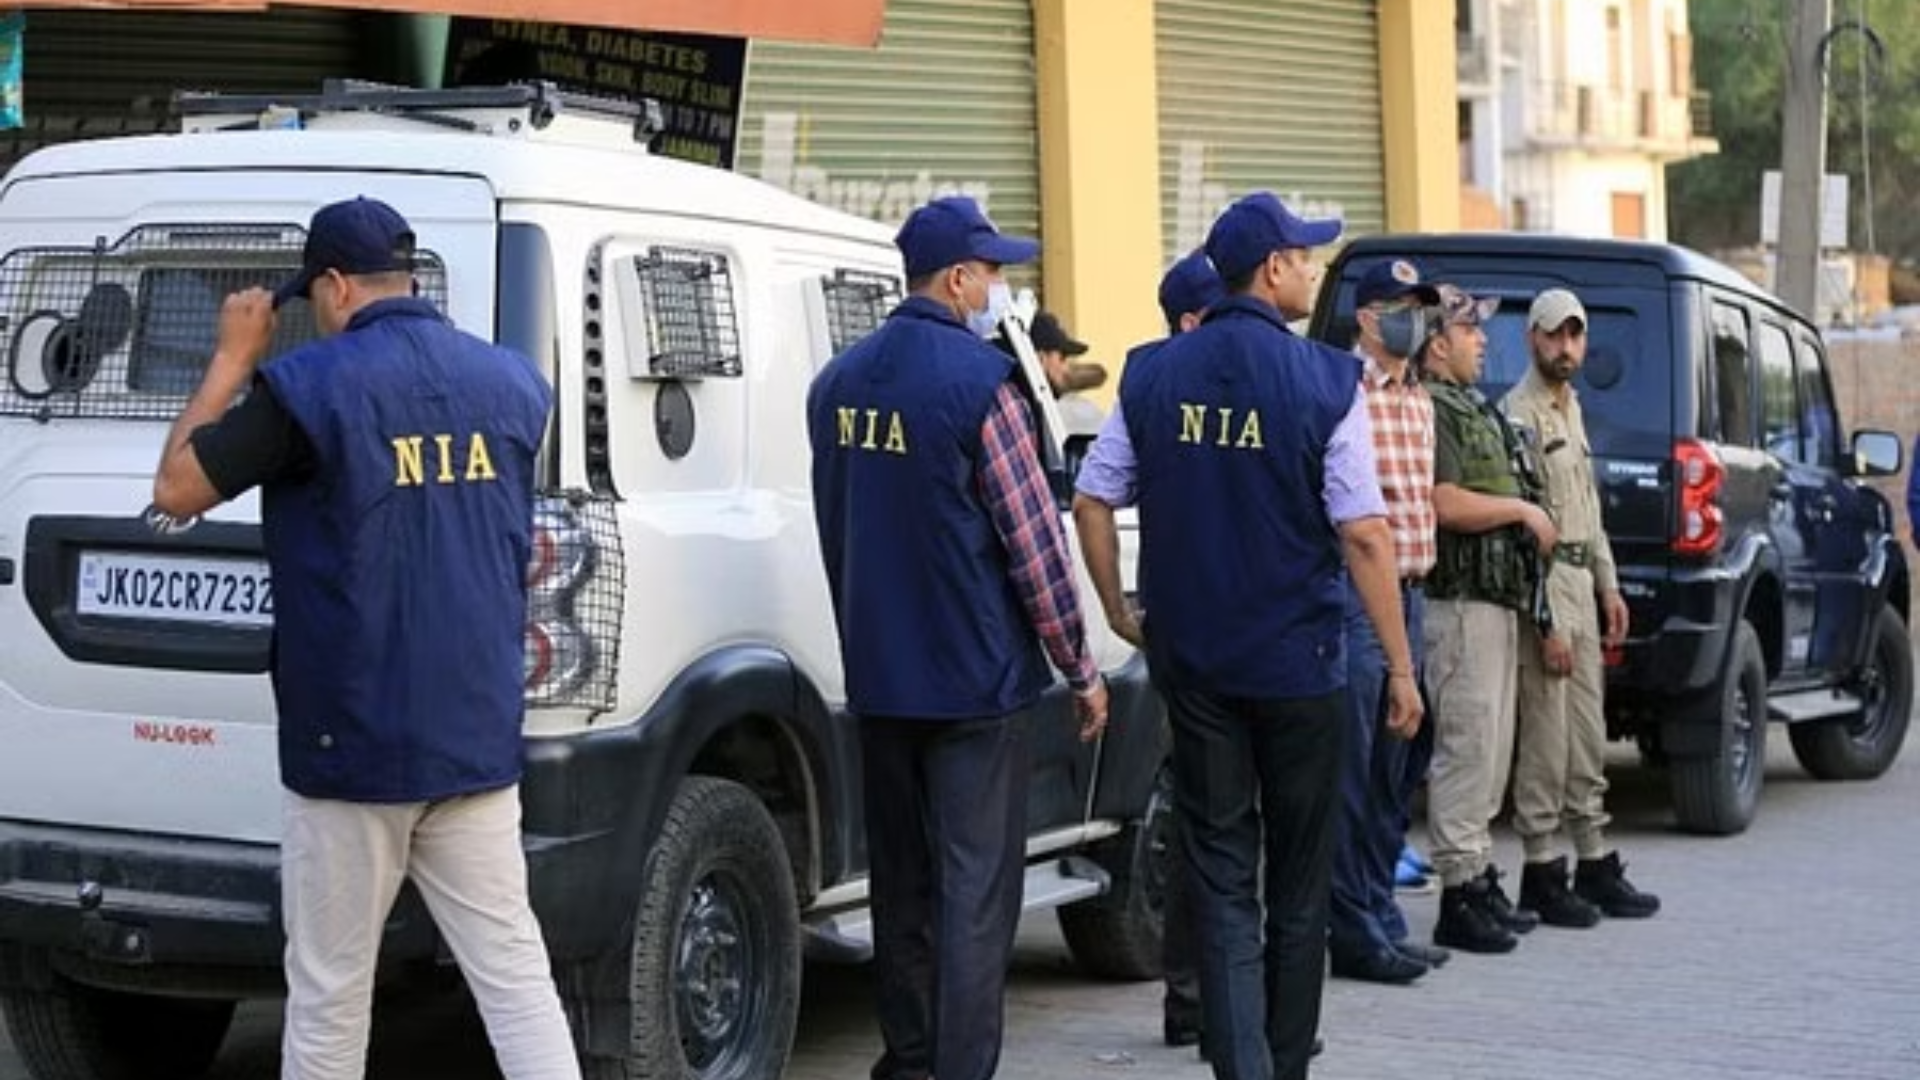 NIA Conducts Raids in Srinagar, J&K, in Connection with Terrorism Case